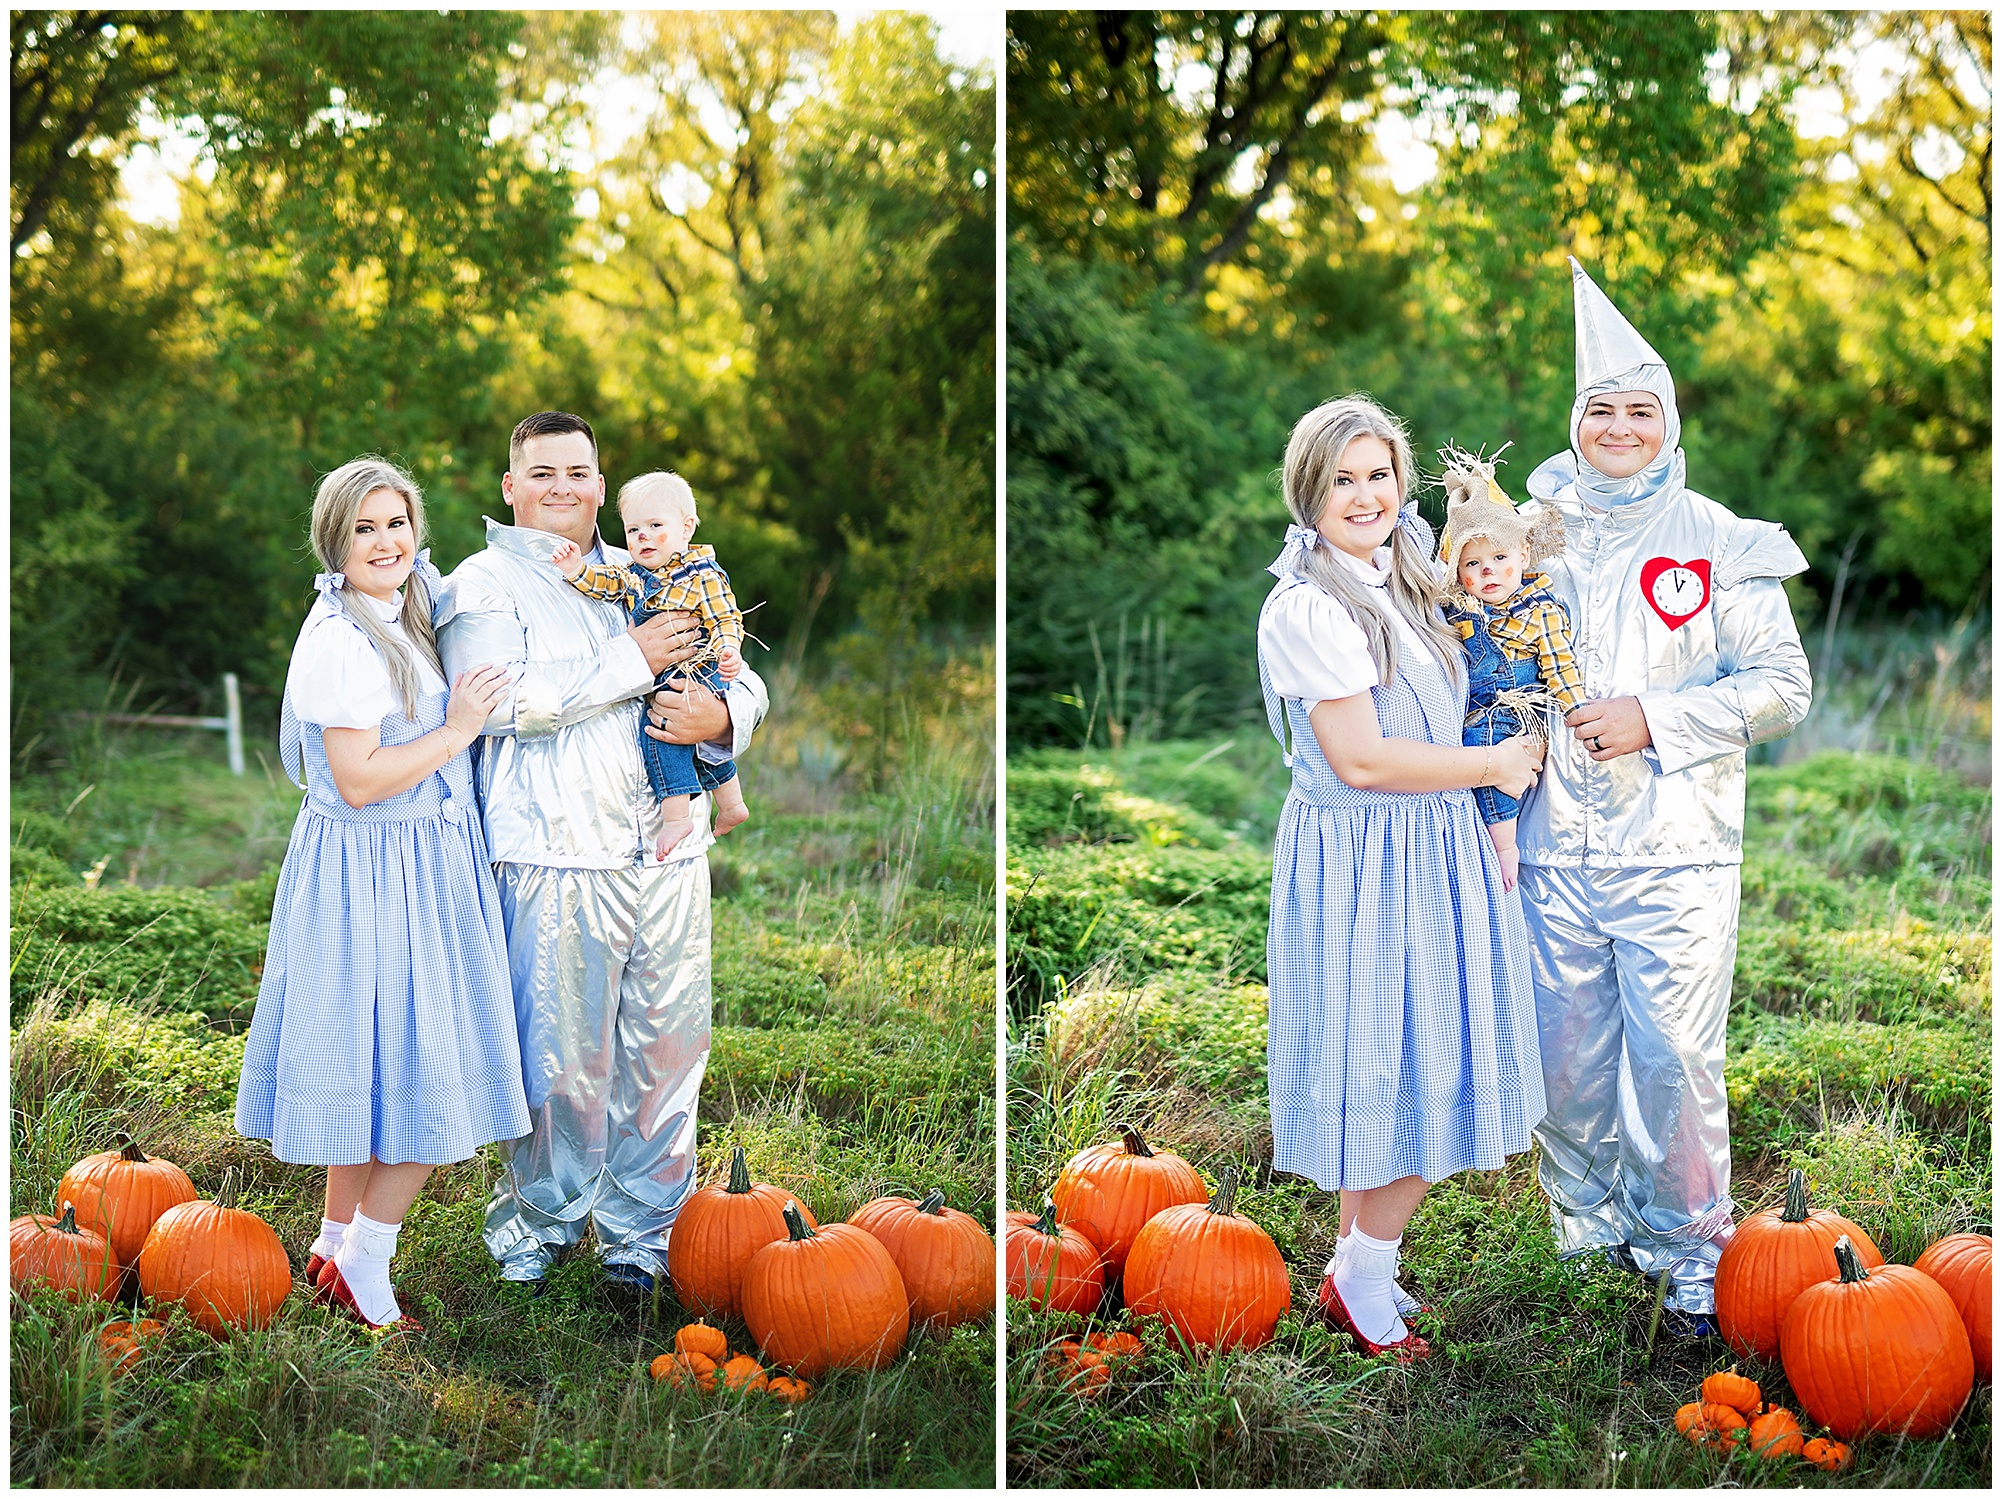 the tin man, scarecrow and Dorthy halloween costumes